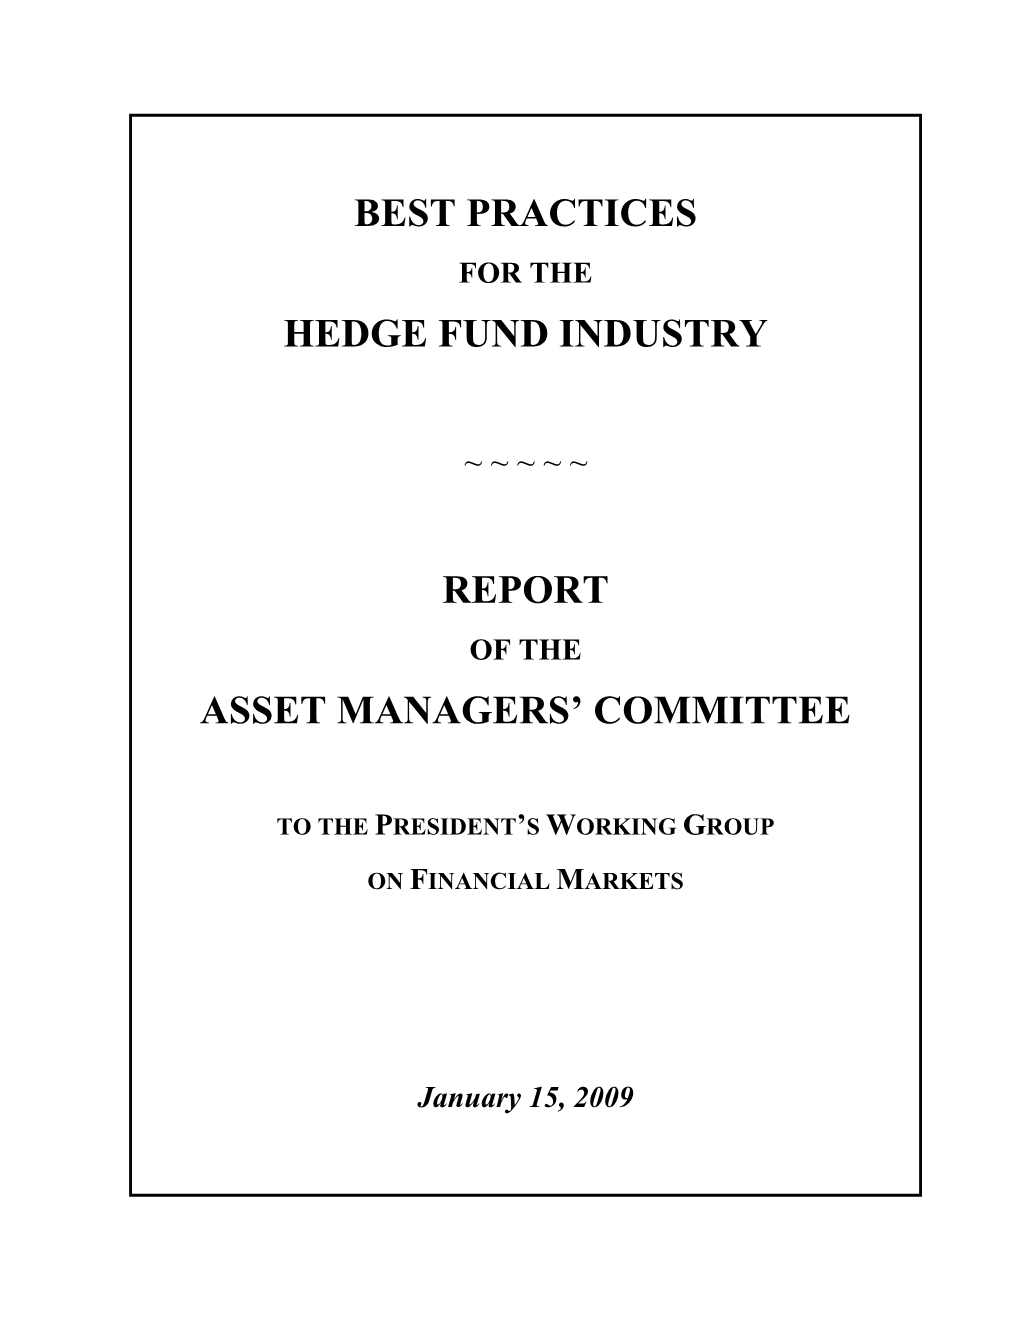 Best Practices in the Hedge Fund Industry